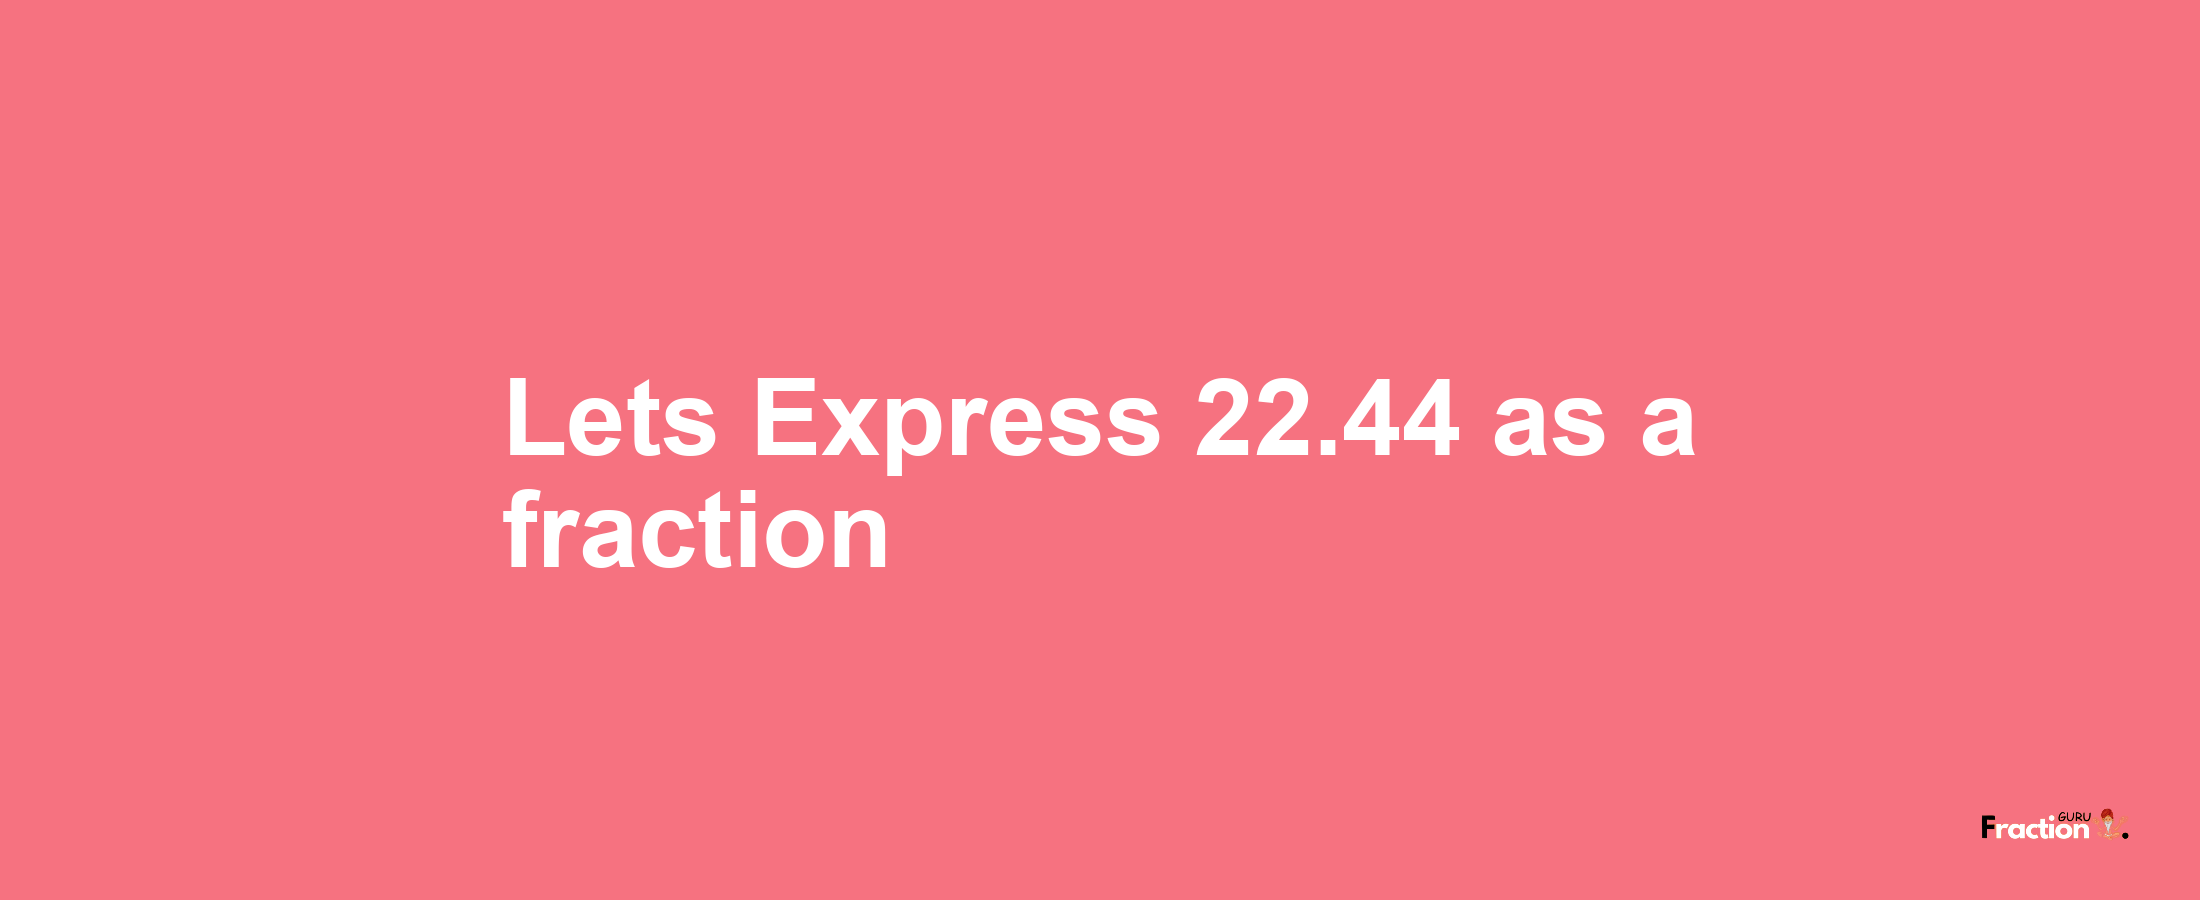 Lets Express 22.44 as afraction